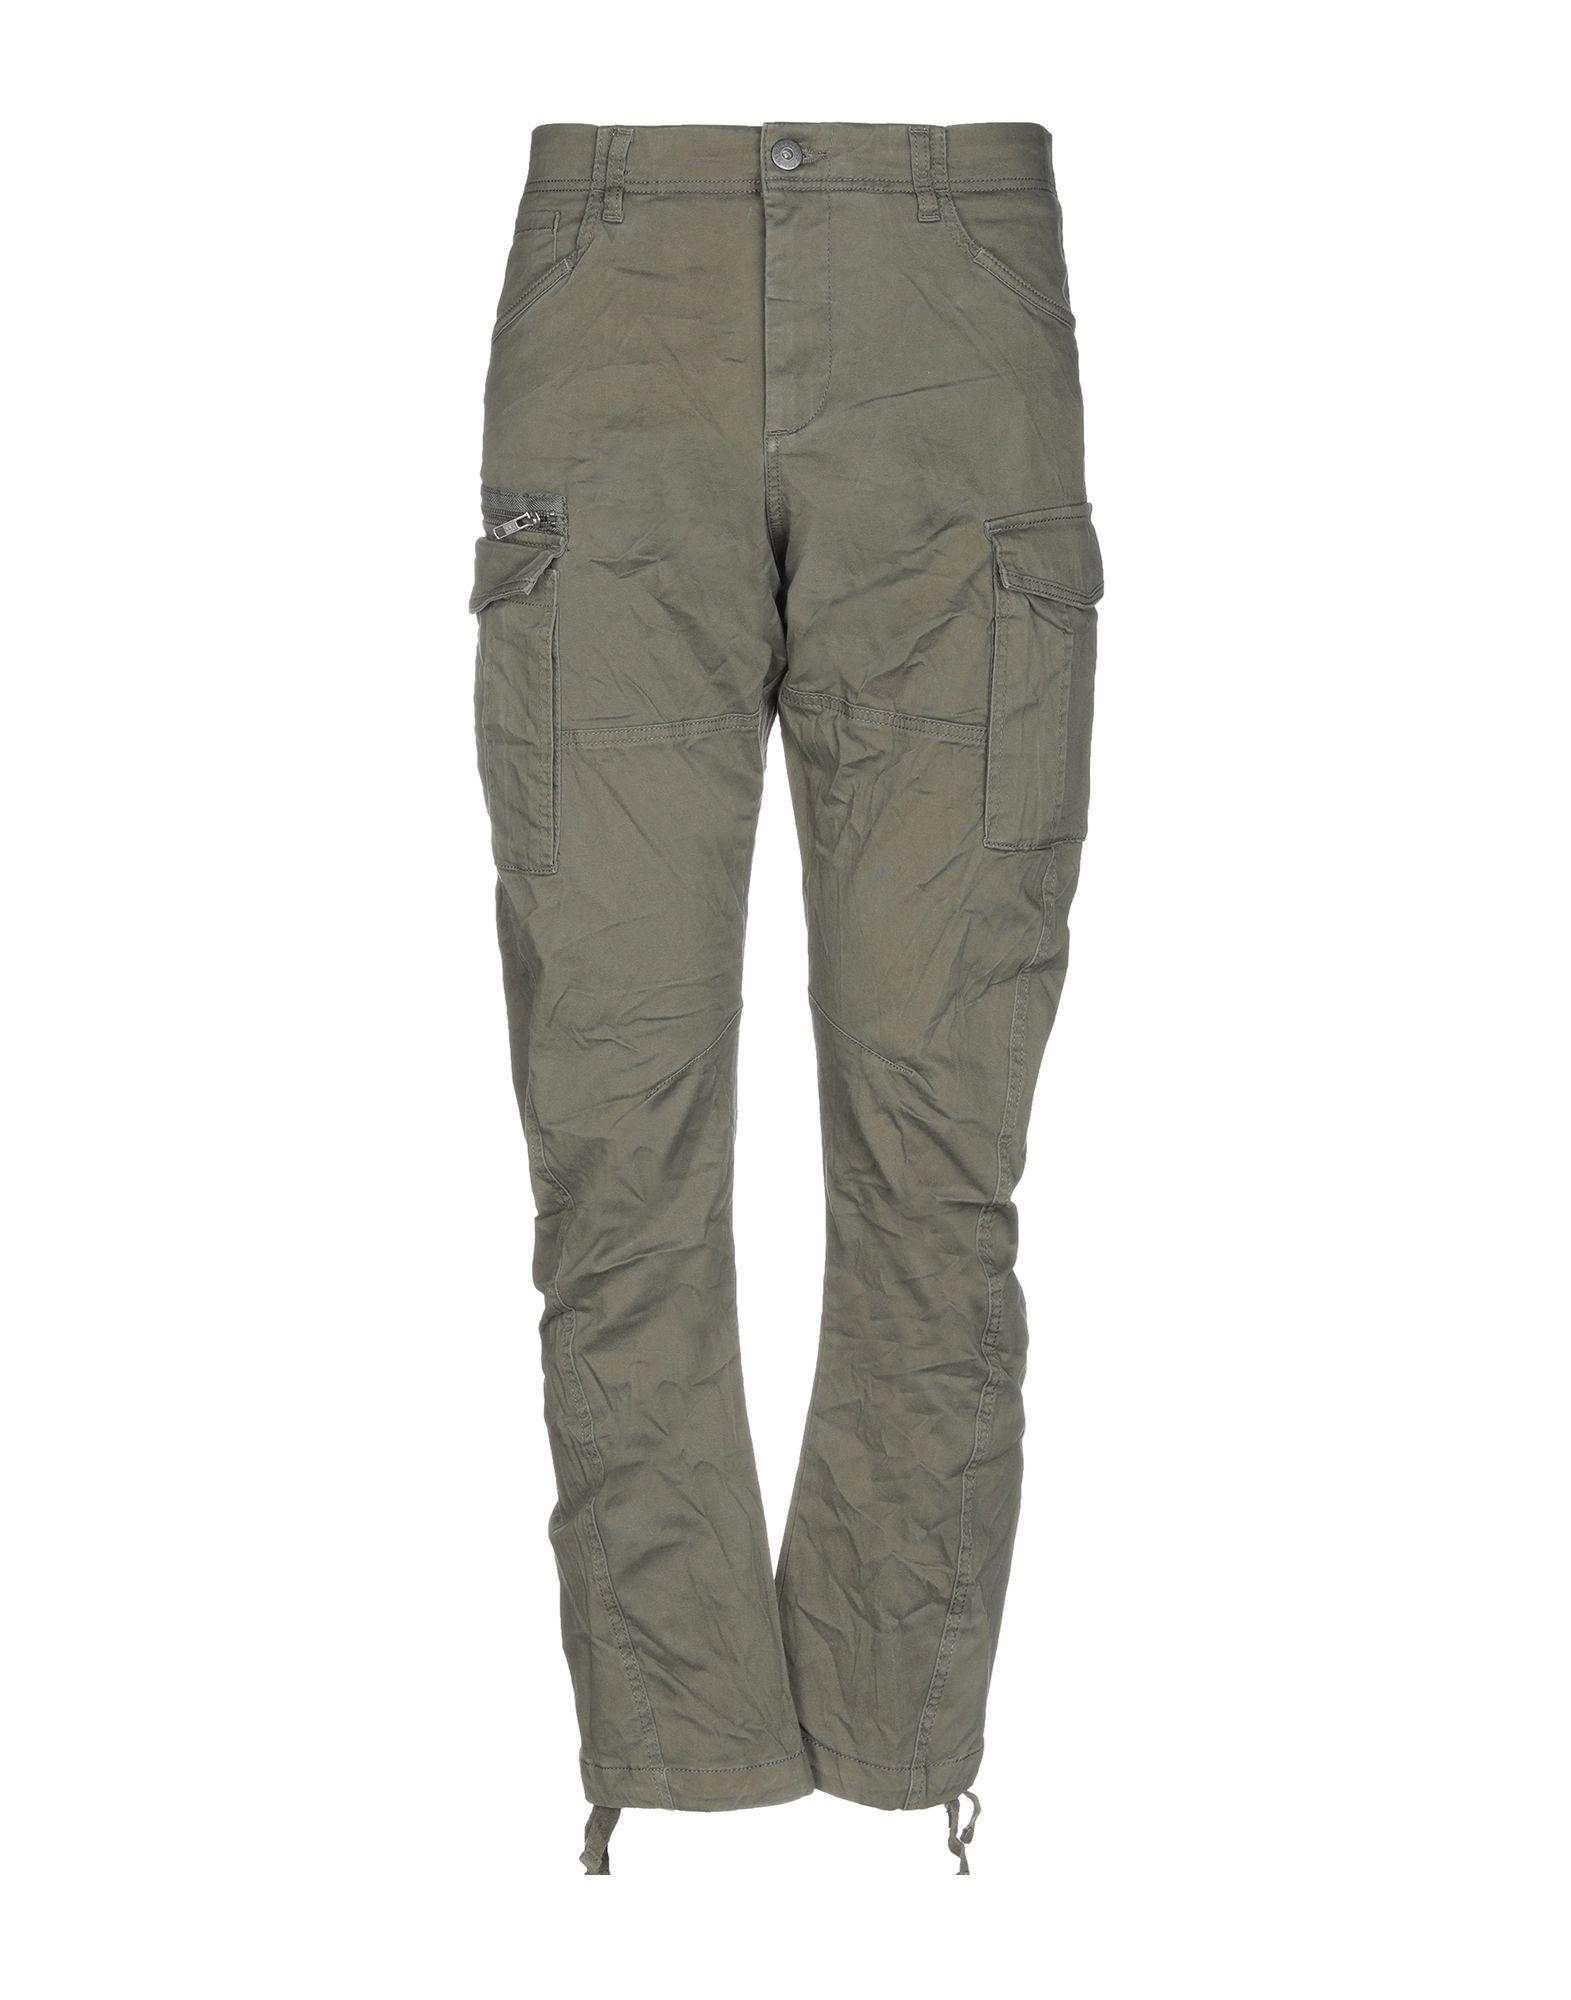 Jack & Jones Cotton Casual Pants in Military Green (Green) for Men - Lyst